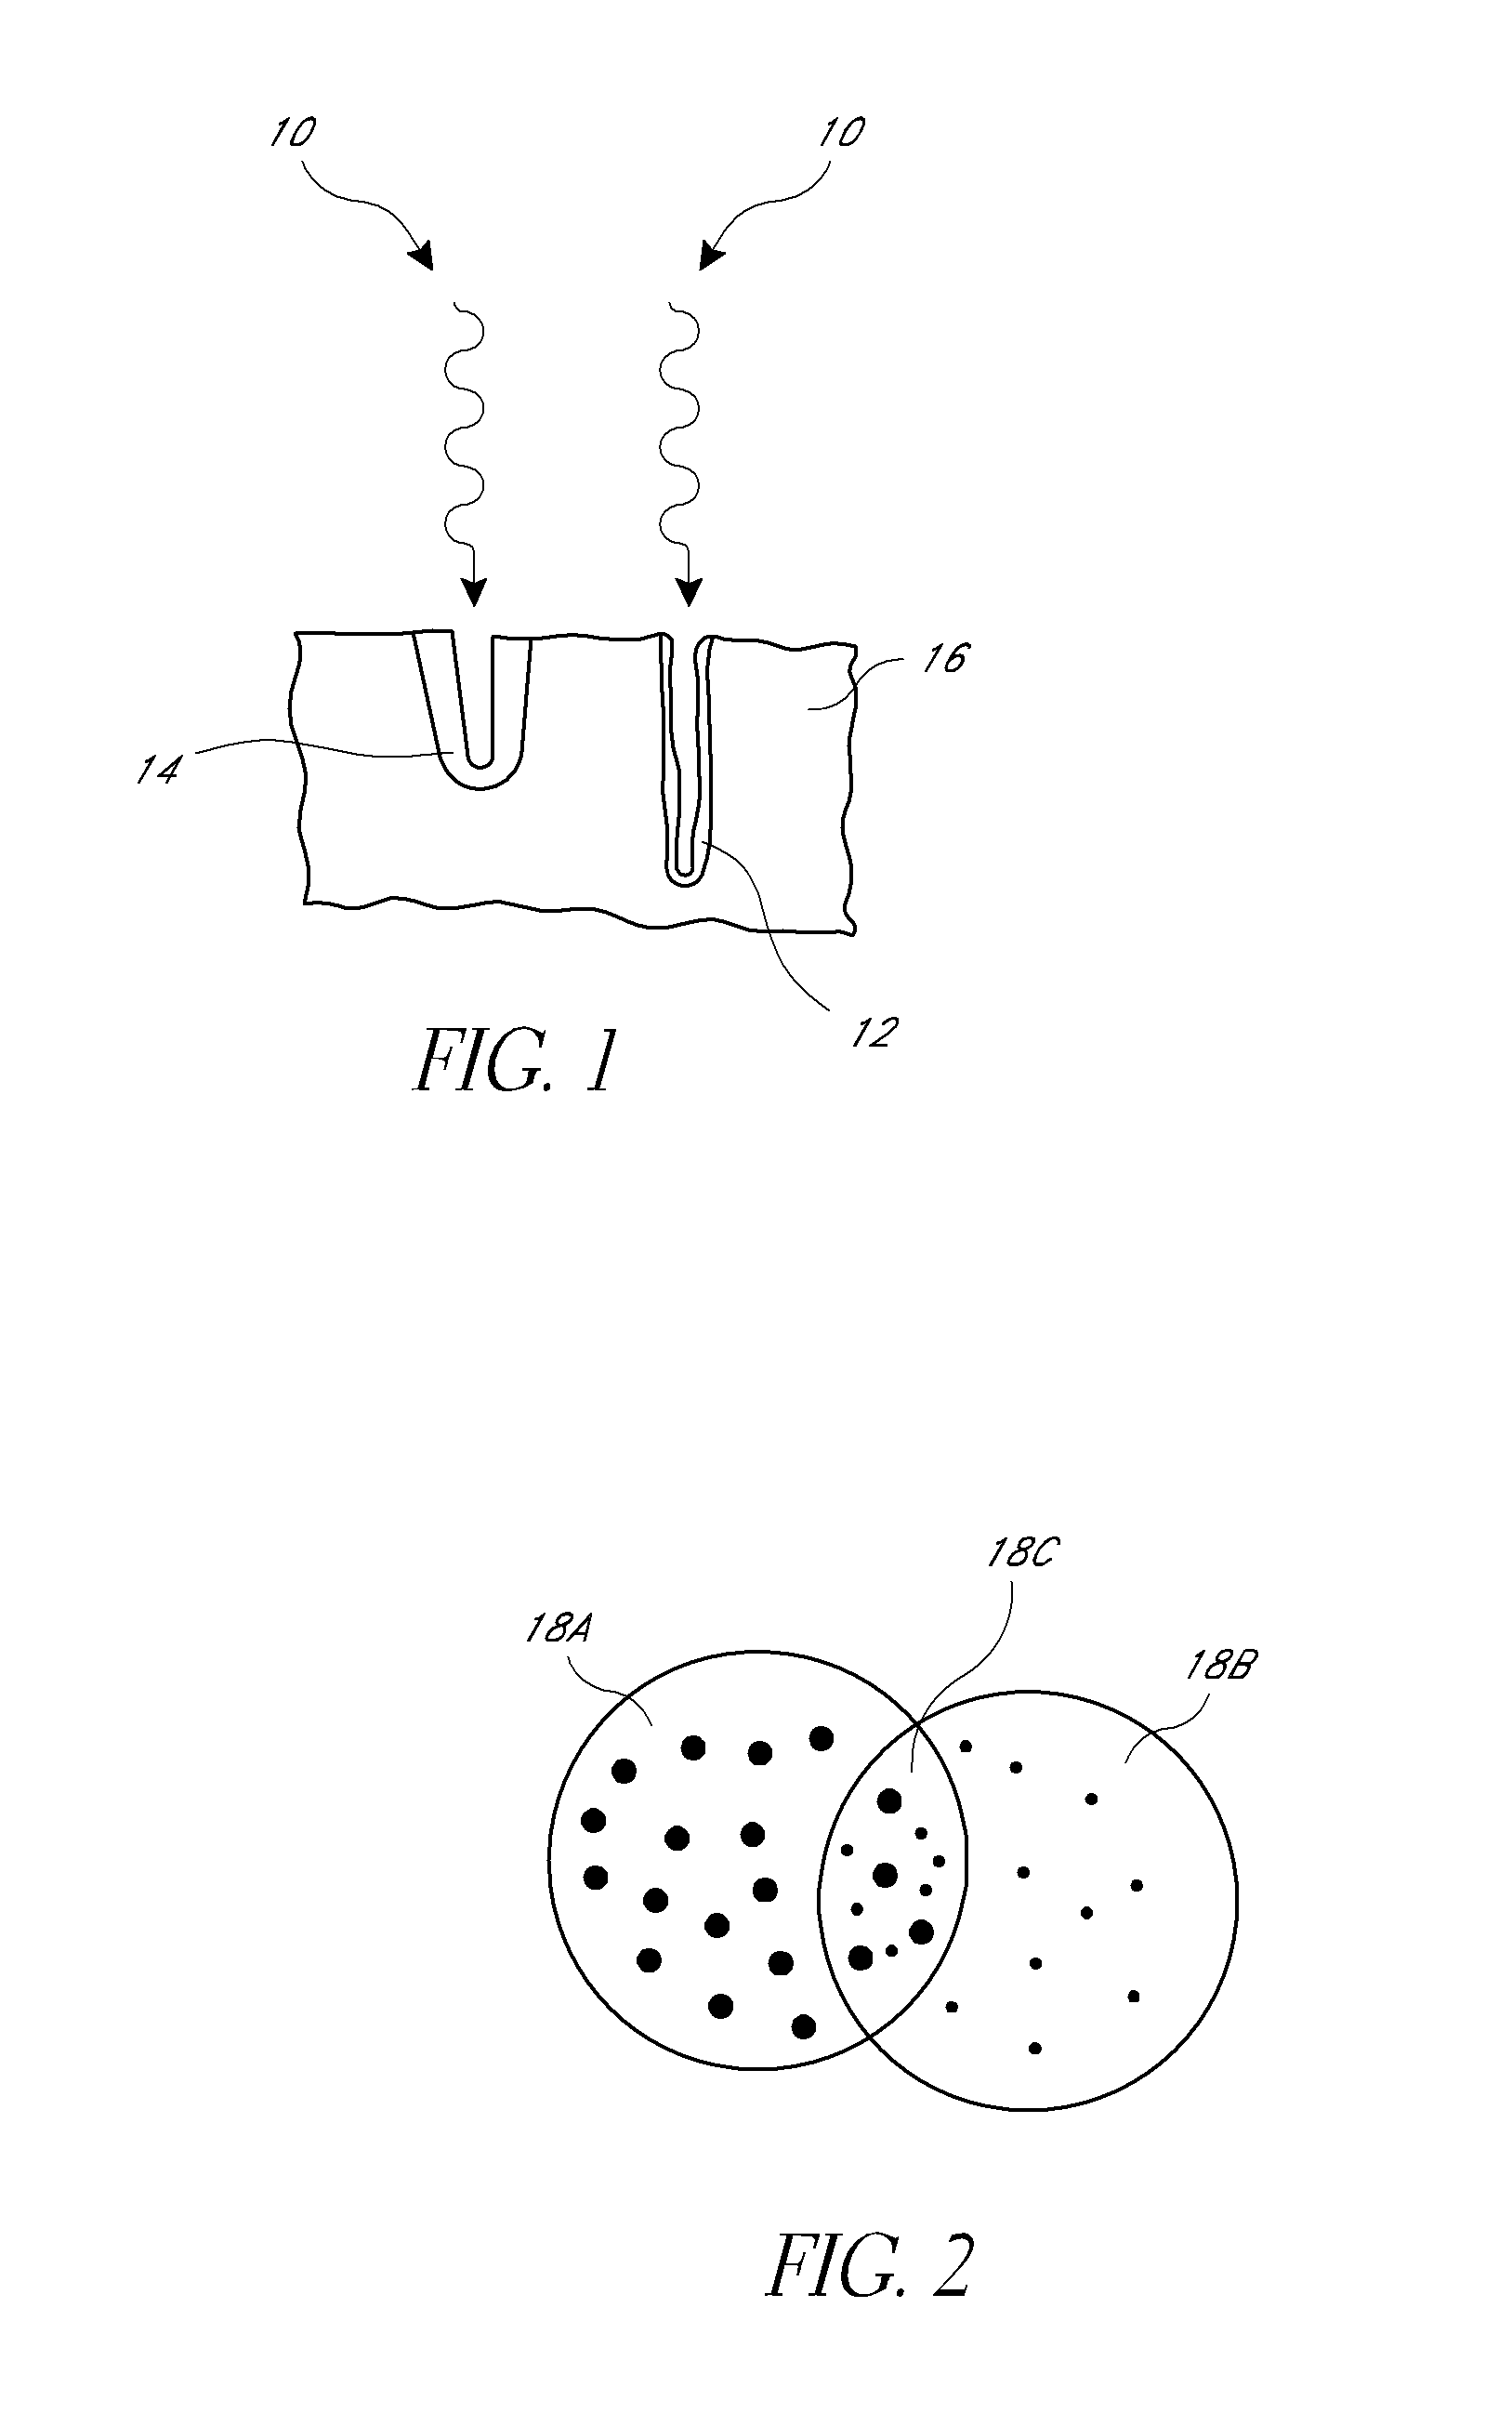 Methods of light treatment of wounds to reduce scar formation